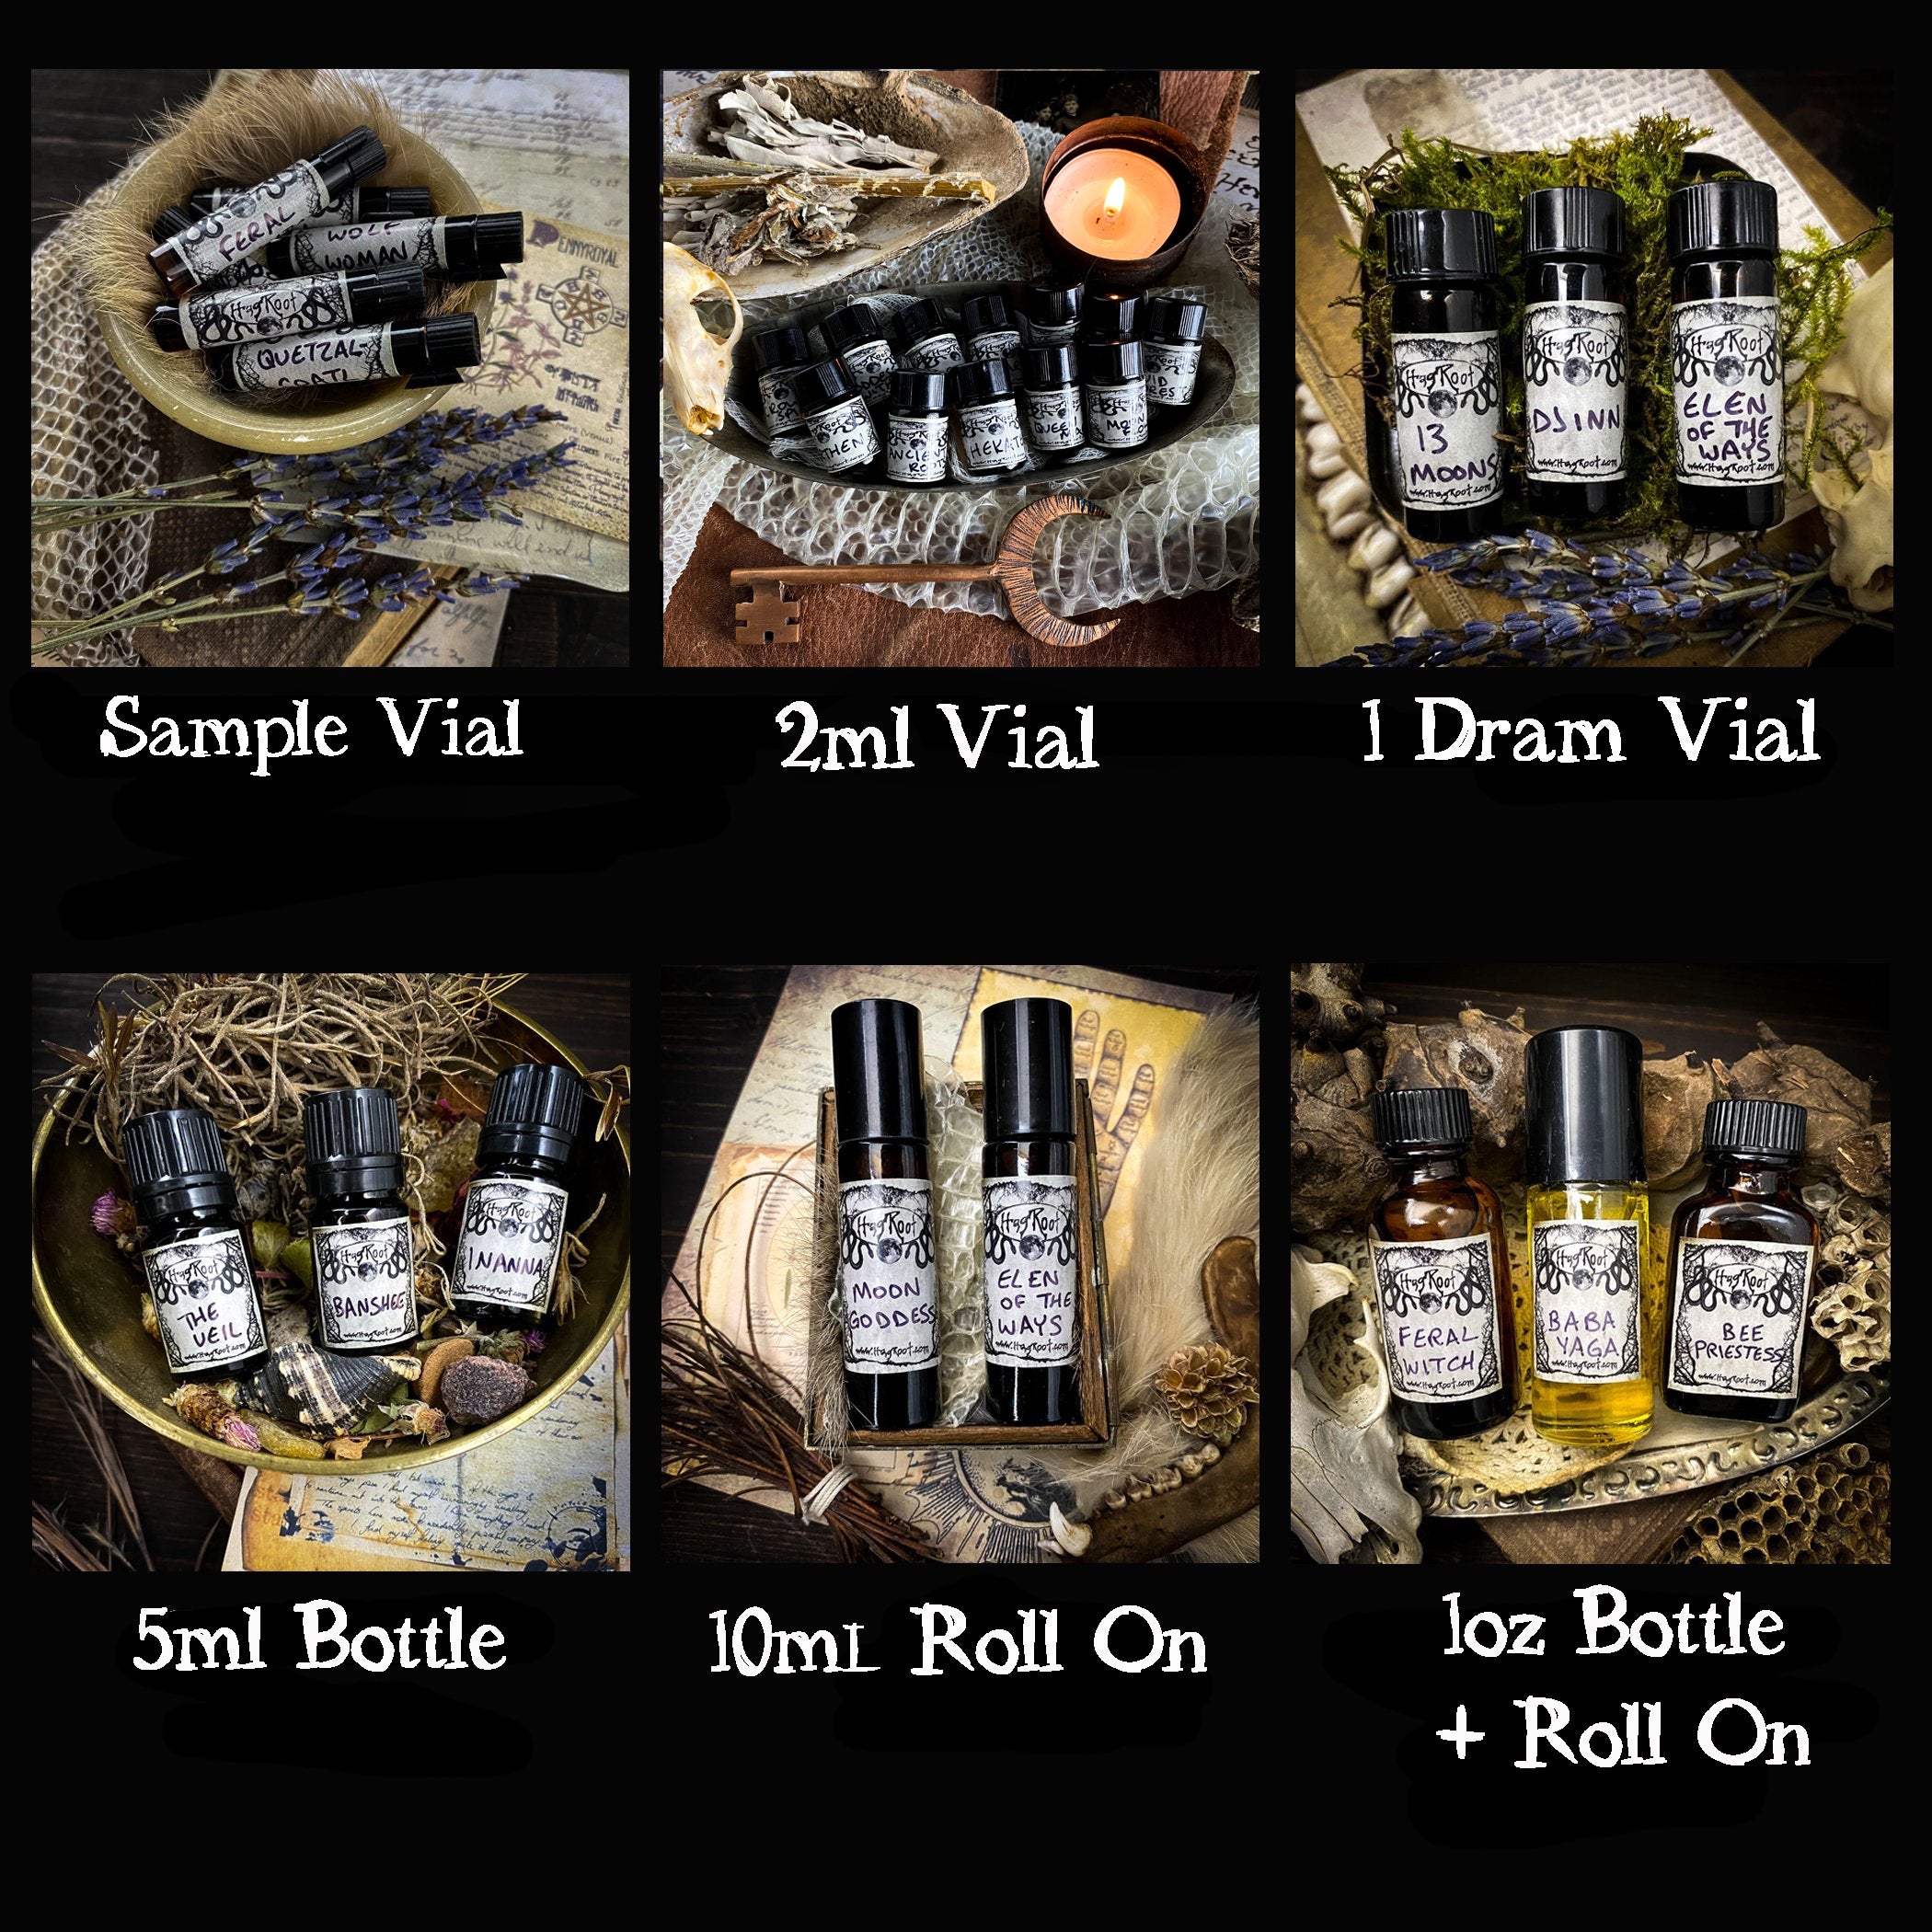 SACRED FIRE-(Smoked Wood, Rich Spices, Dark Florals)-Perfume, Cologne, Anointing, Ritual Oil